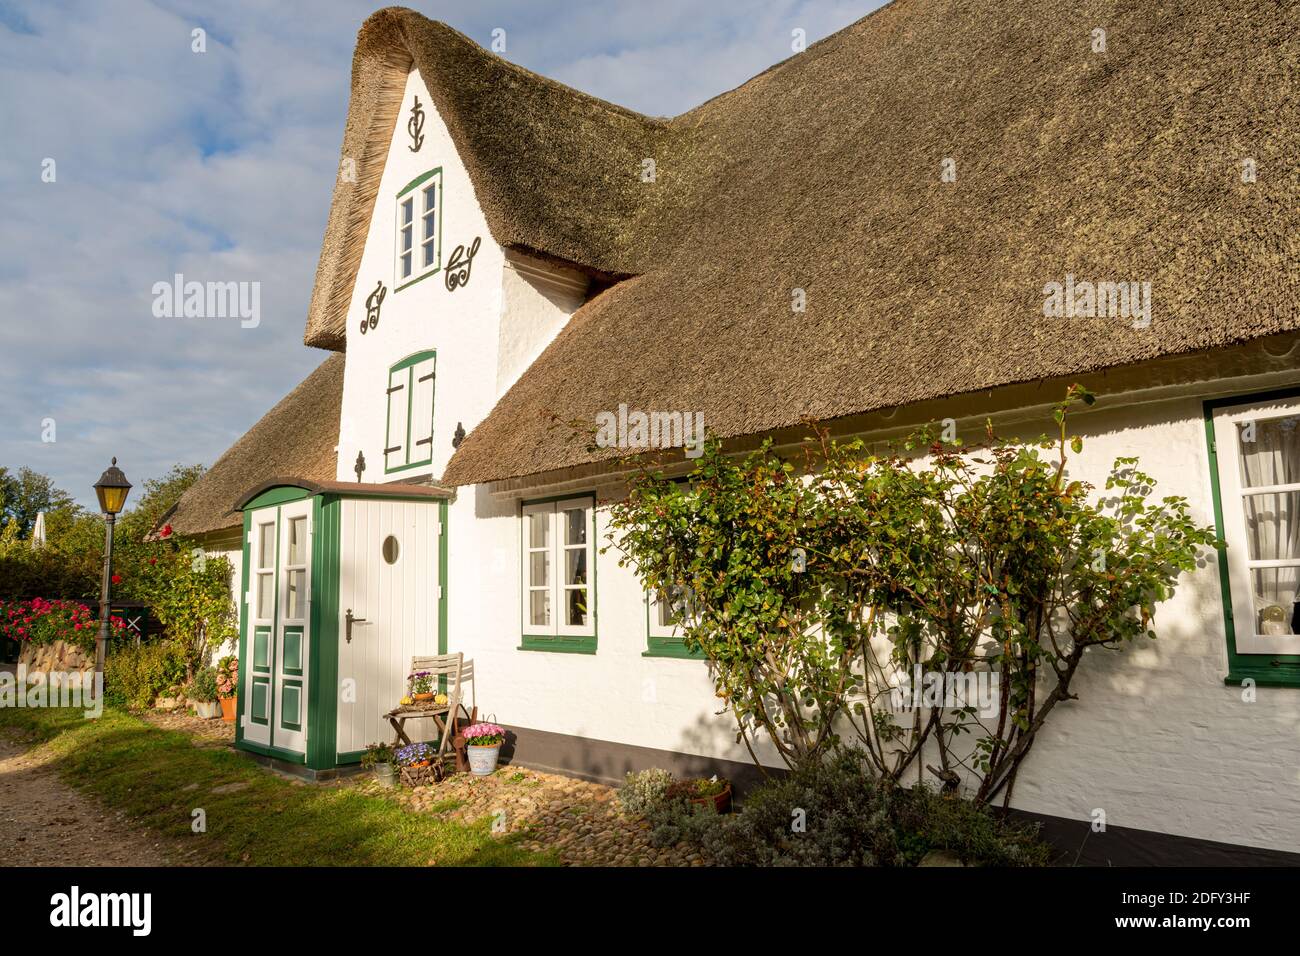 Amrum, Germany - October 17, 2020: White thatched house in Nebel Stock Photo